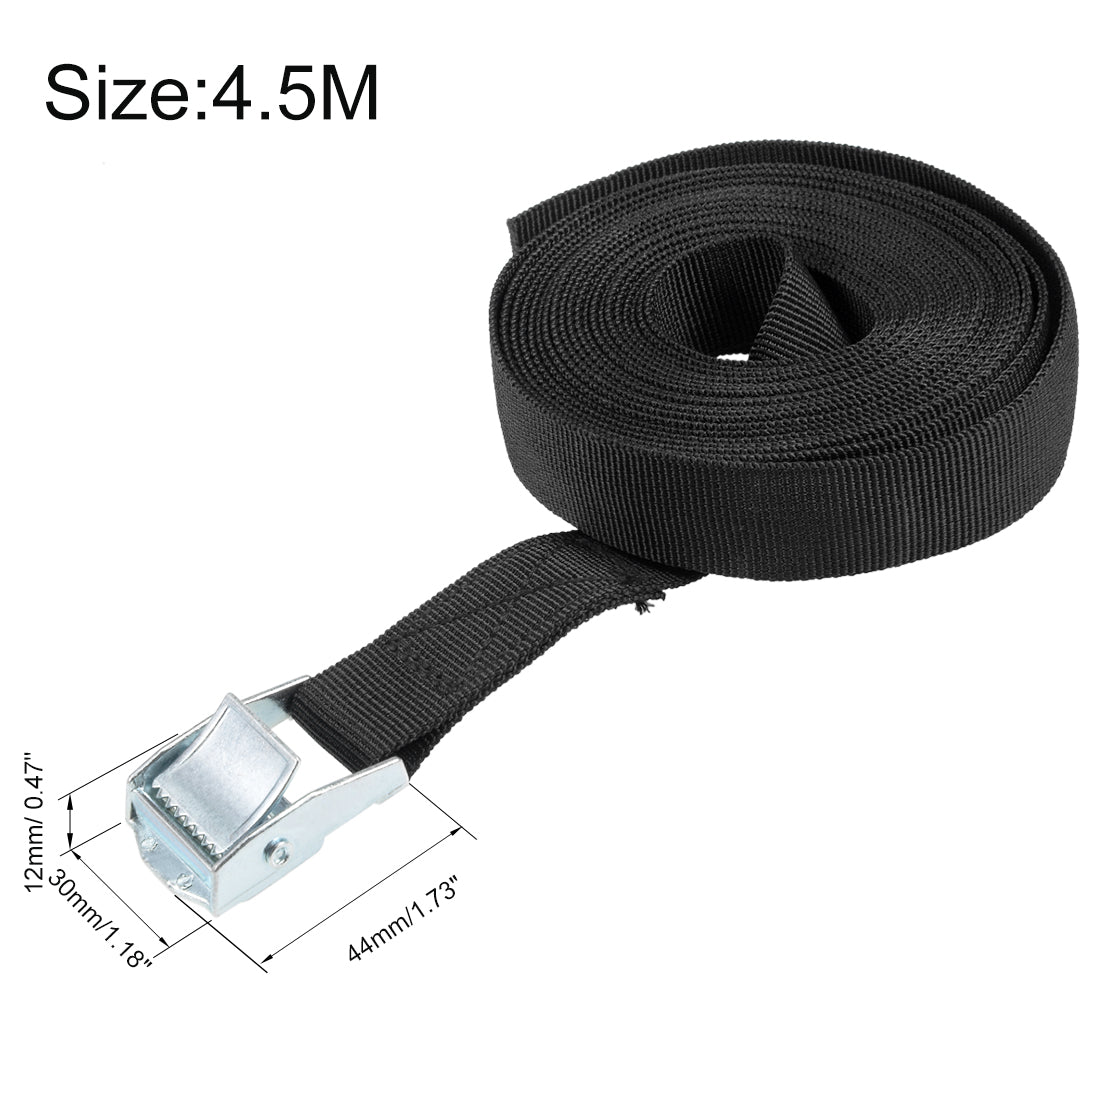 uxcell Uxcell 4.5M x 25mm Lashing Strap Cargo Tie Down Straps Buckle Up to 80Kg, Black, 4Pcs